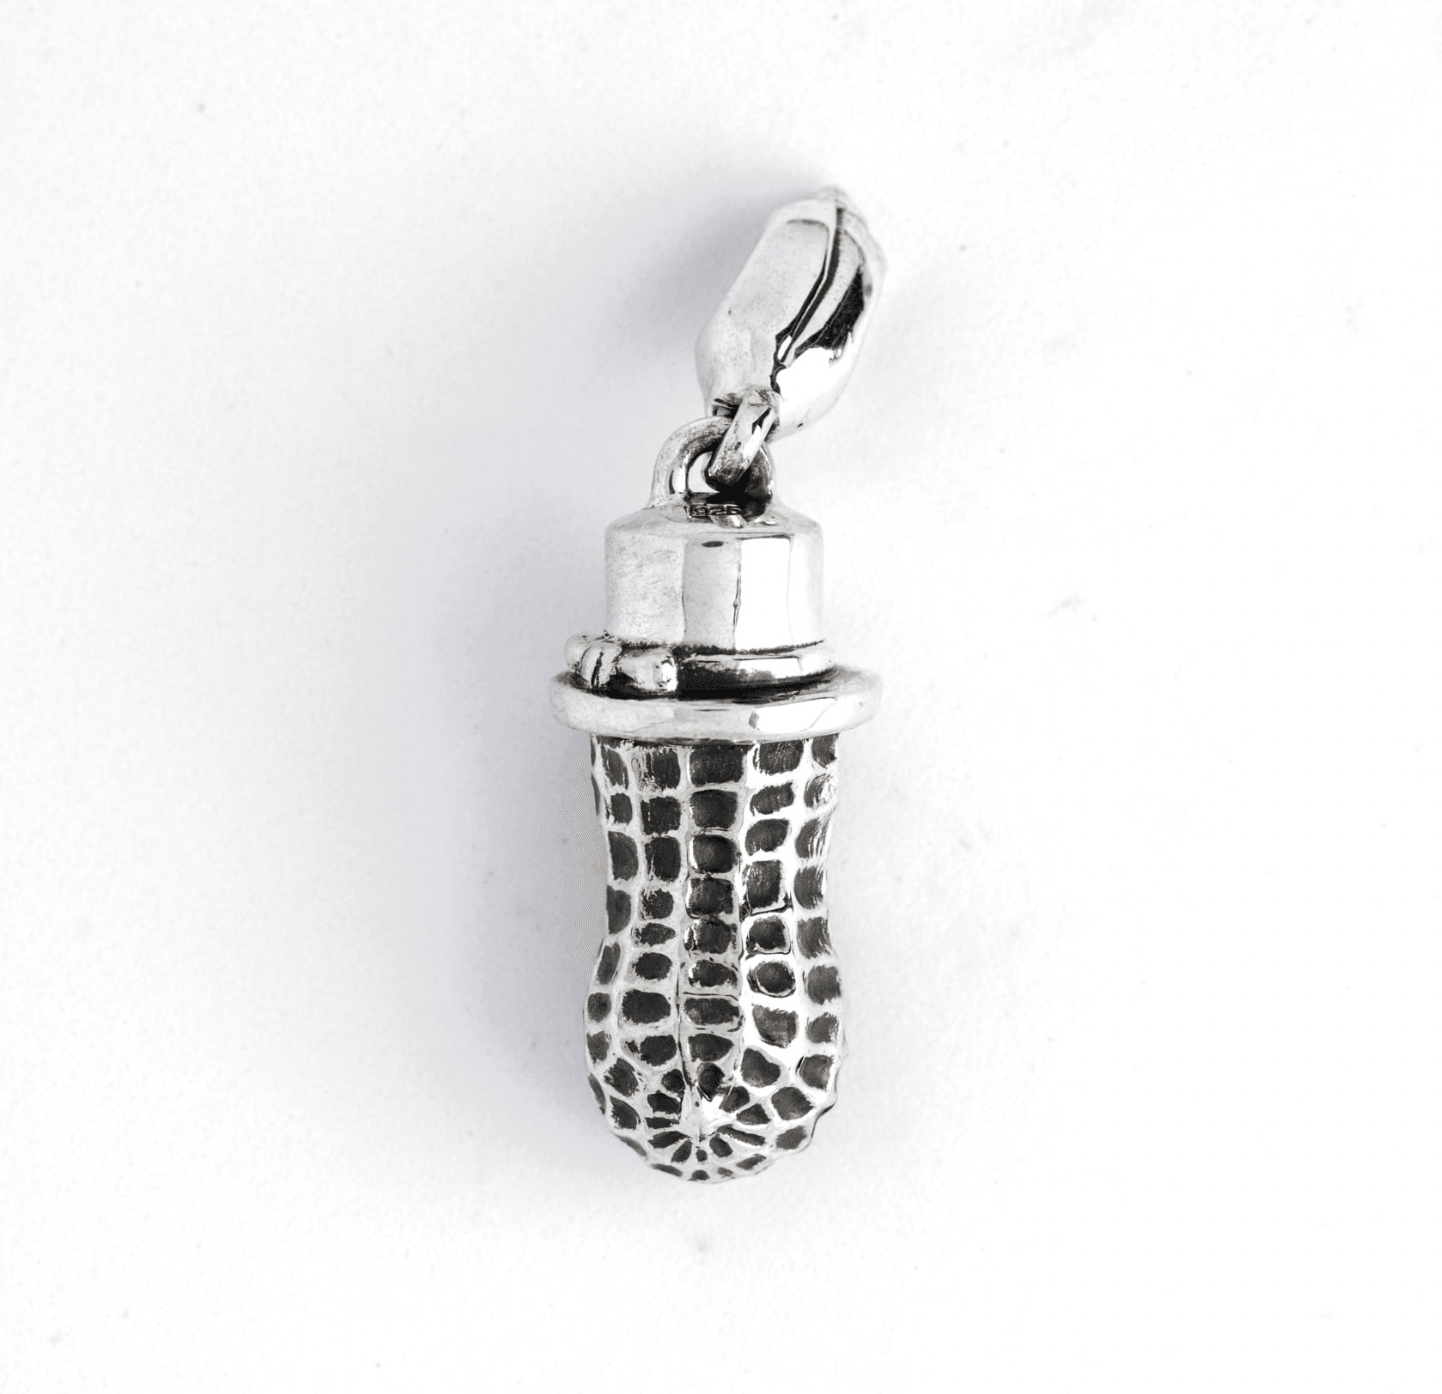 Image showing the Peanuts & Co MEDIUM PEANUTS Pendant - Silver which is a Jewellery described by the following info Accessories, Jewellery, Peanuts & Co, Released and sold on the IRON HEART GERMANY online store